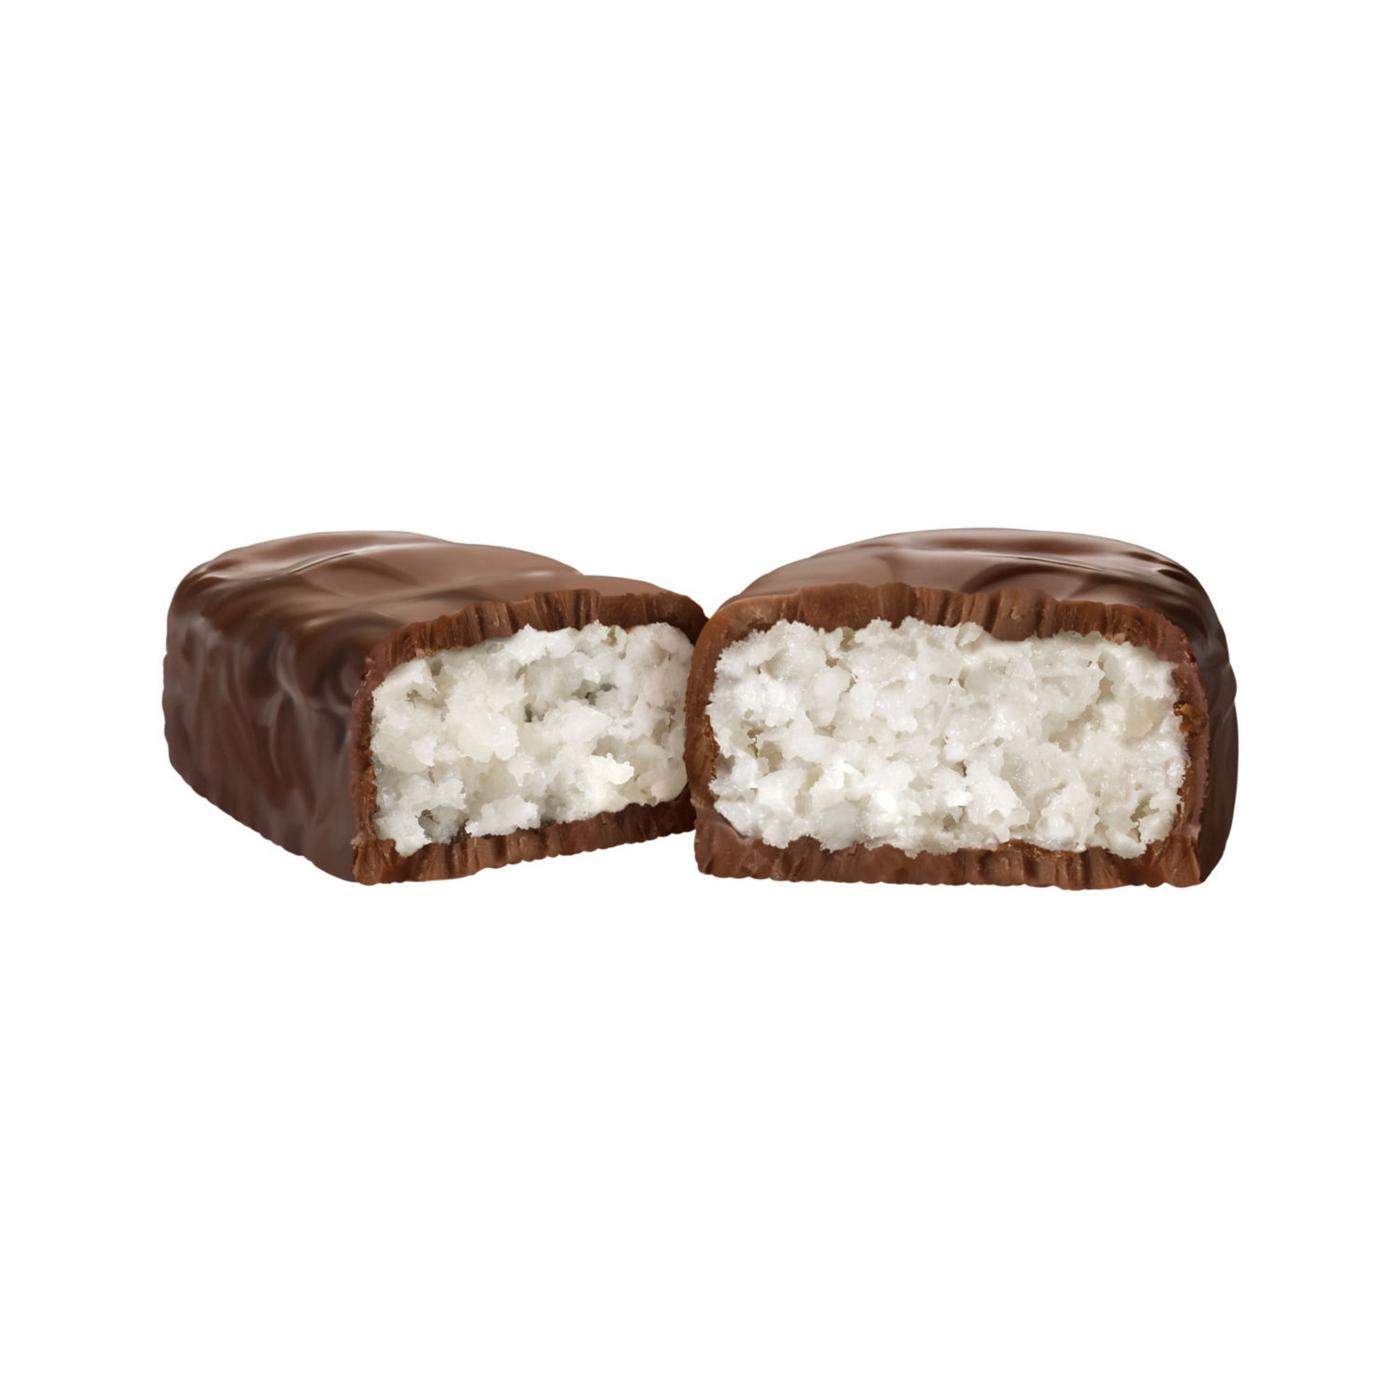 Mounds Dark Chocolate & Coconut Candy Bar; image 5 of 5